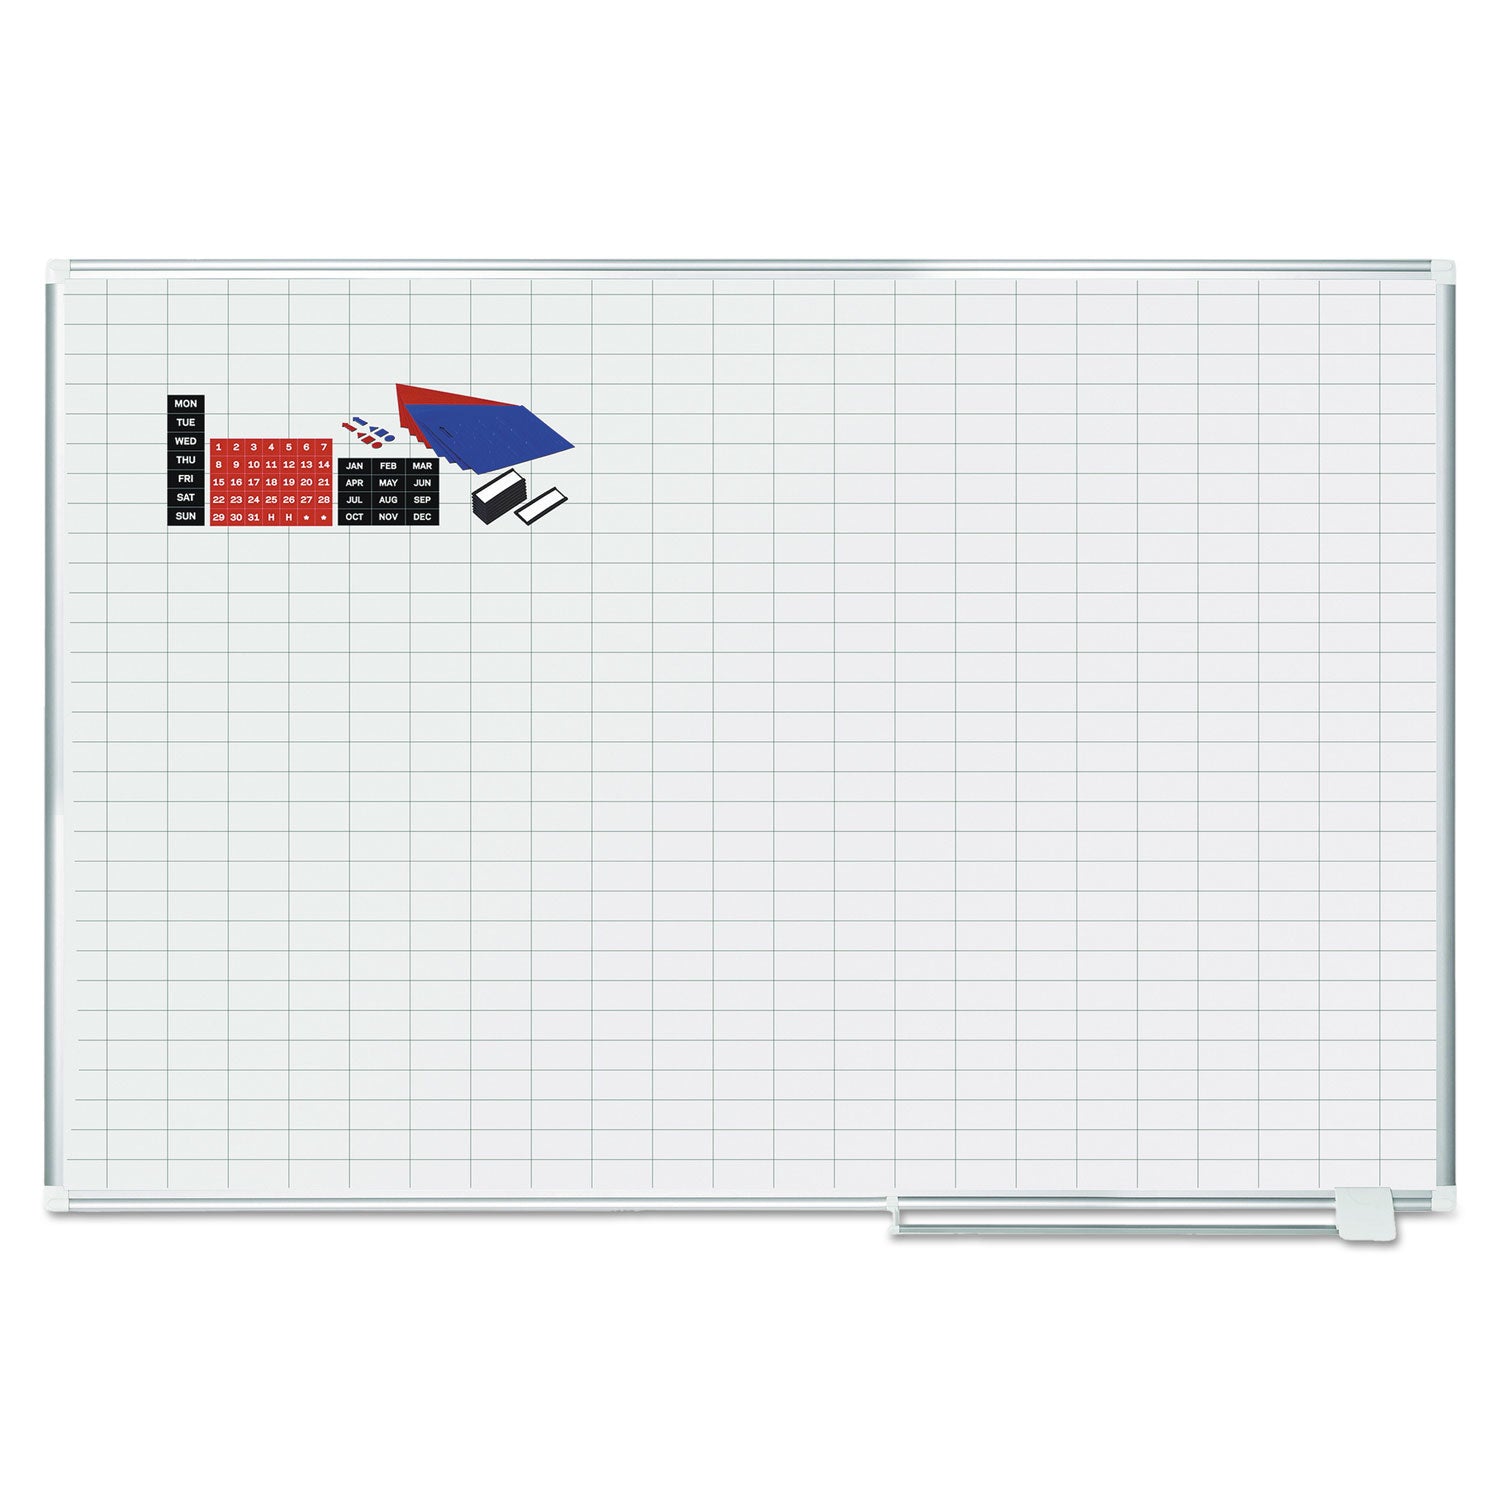 Gridded Magnetic Steel Dry Erase Planning Board with Accessories, 1 x 2 Grid, 72 x 48, White Surface, Silver Aluminum Frame - 